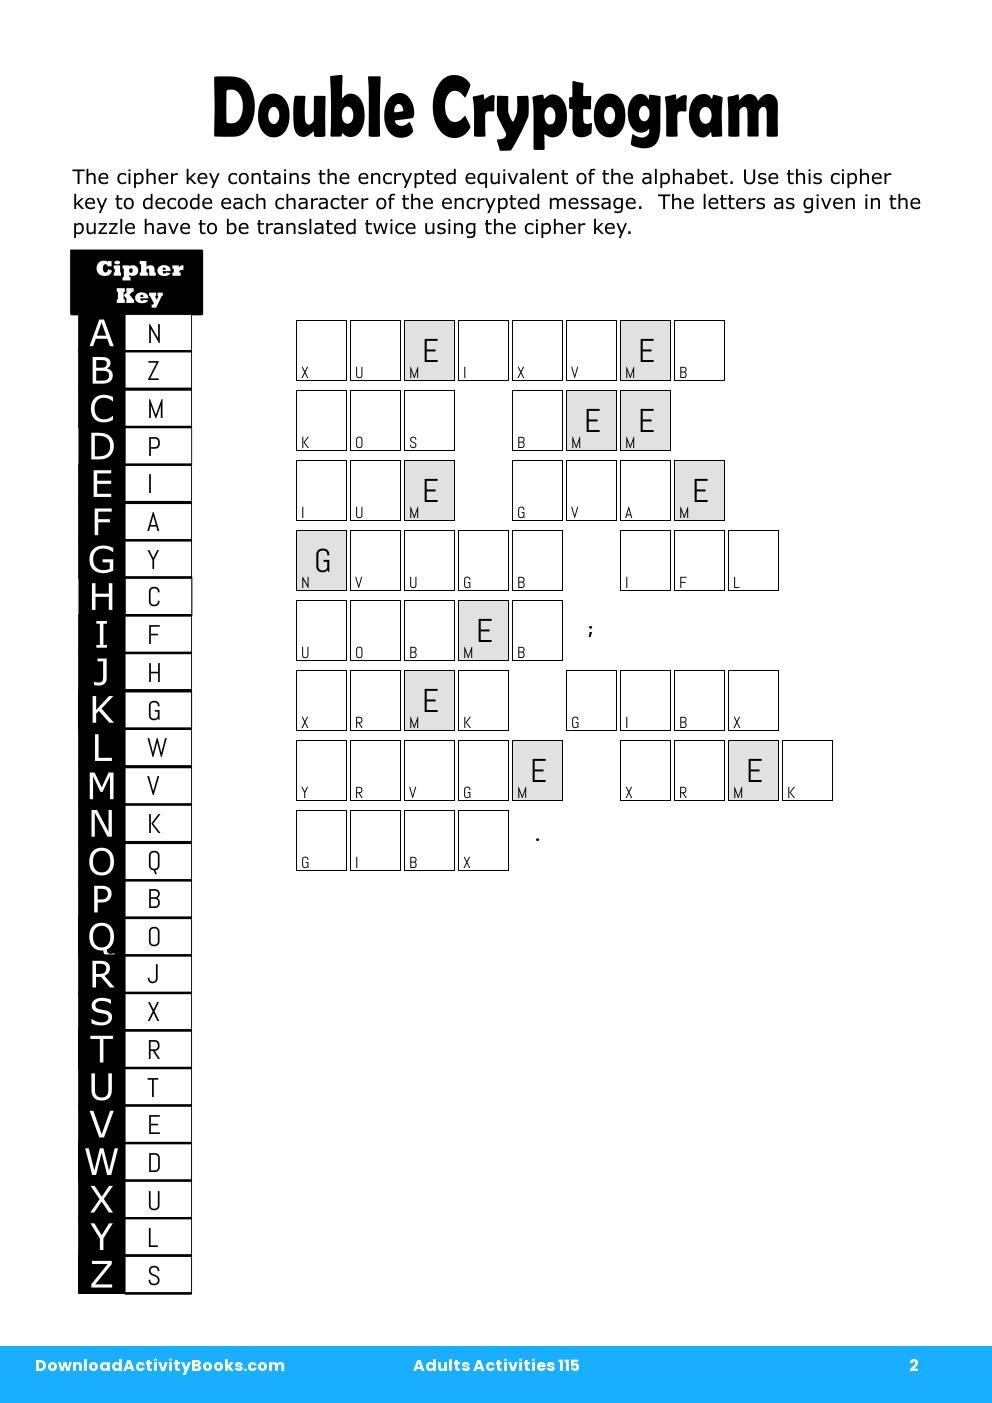 Double Cryptogram in Adults Activities 115